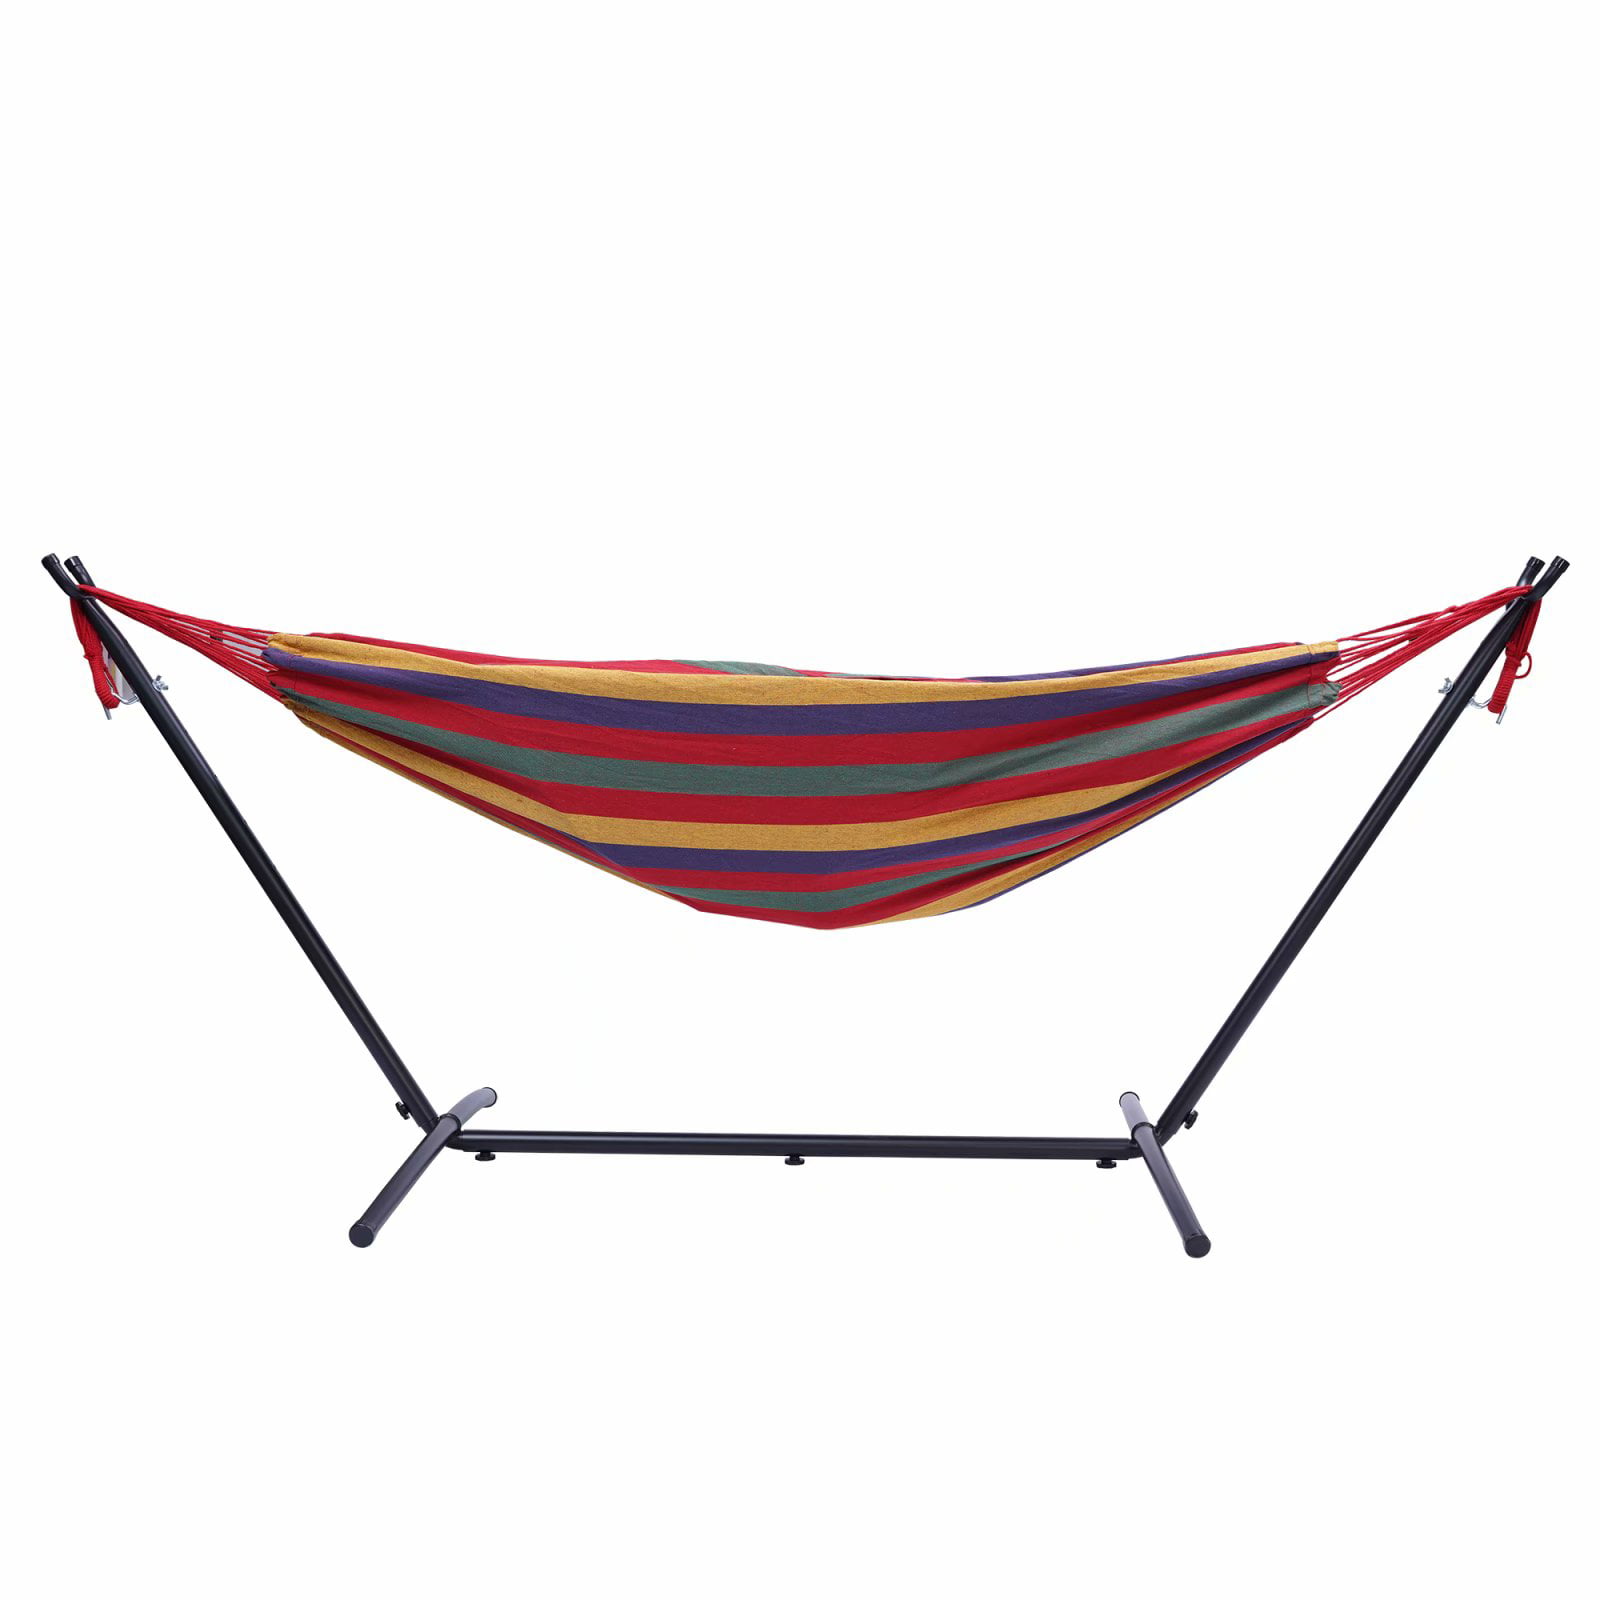 Details about   New Double Hammock With Space Saving Steel Stand Includes Carrying Case 450Lbs 